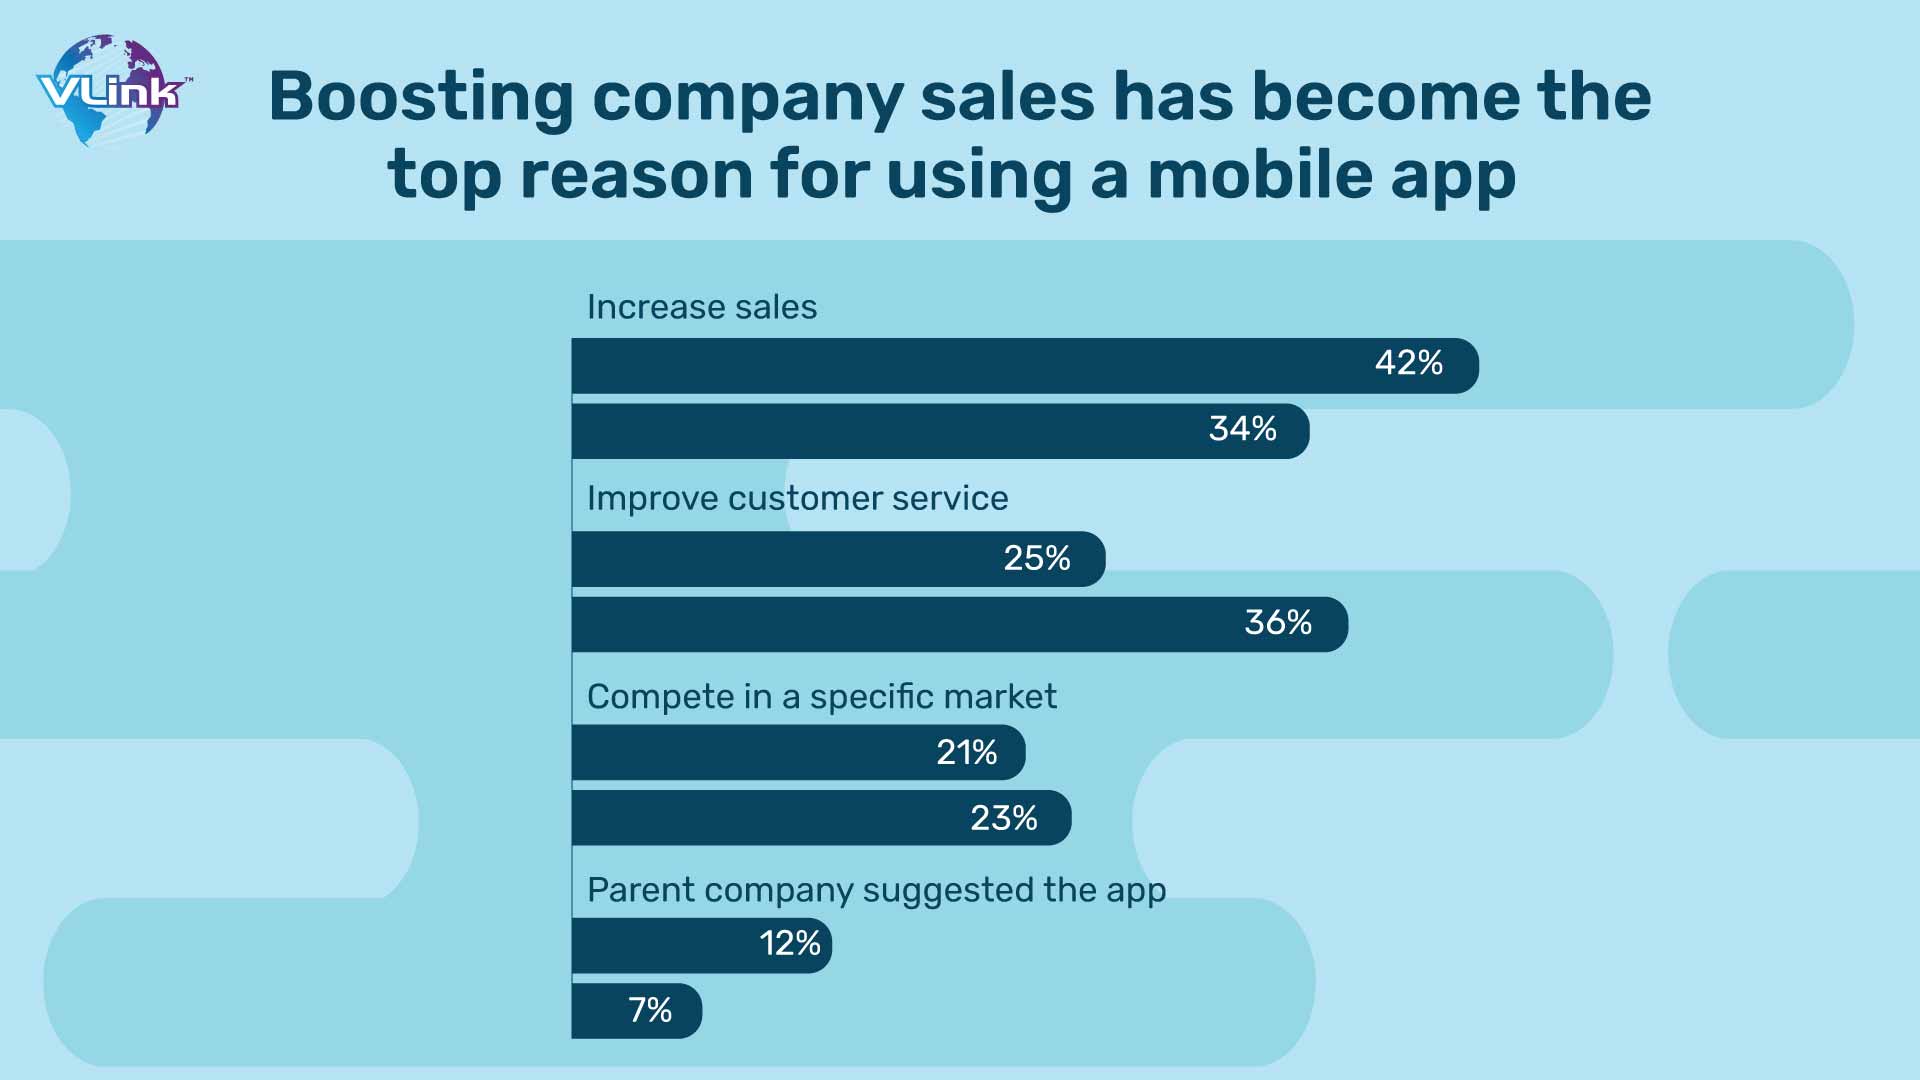 Boosting company sales has become the top reason for using a mobile app